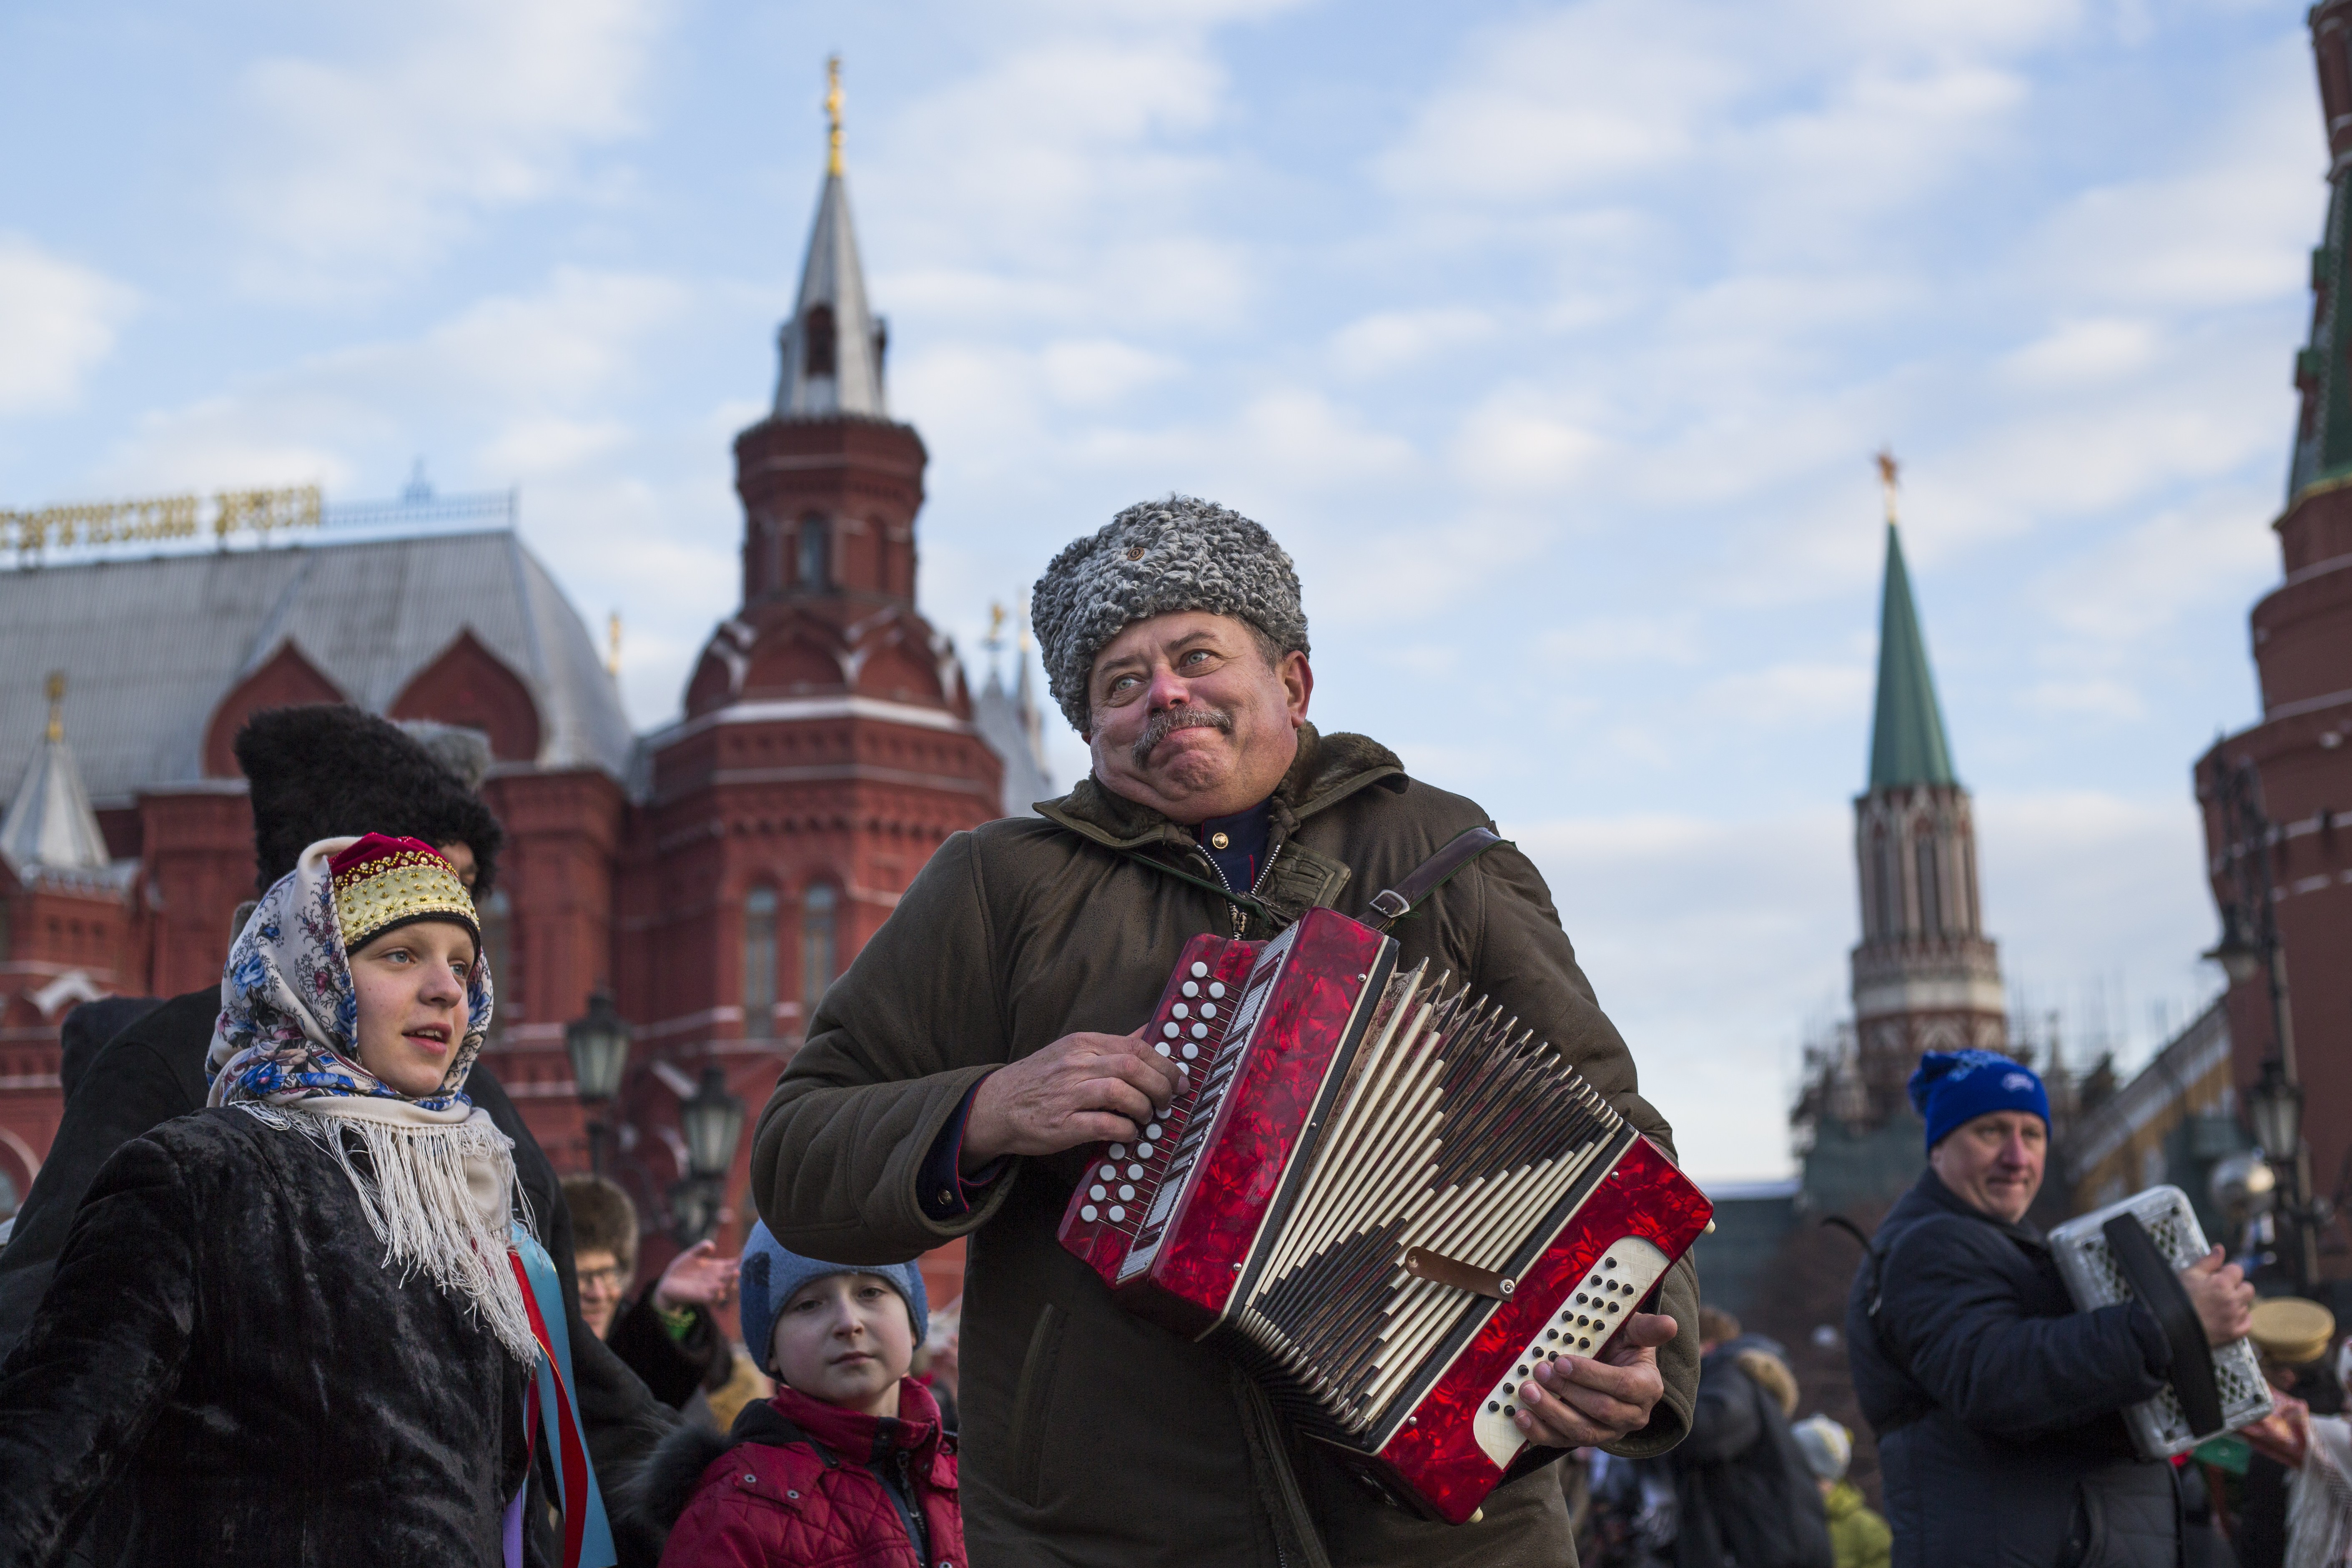 Men play accordions during a folk performance just off Red Square in Moscow, Russia, Wednesday, Feb. 24, 2016. (AP Photo/Alexander Zemlianichenko)